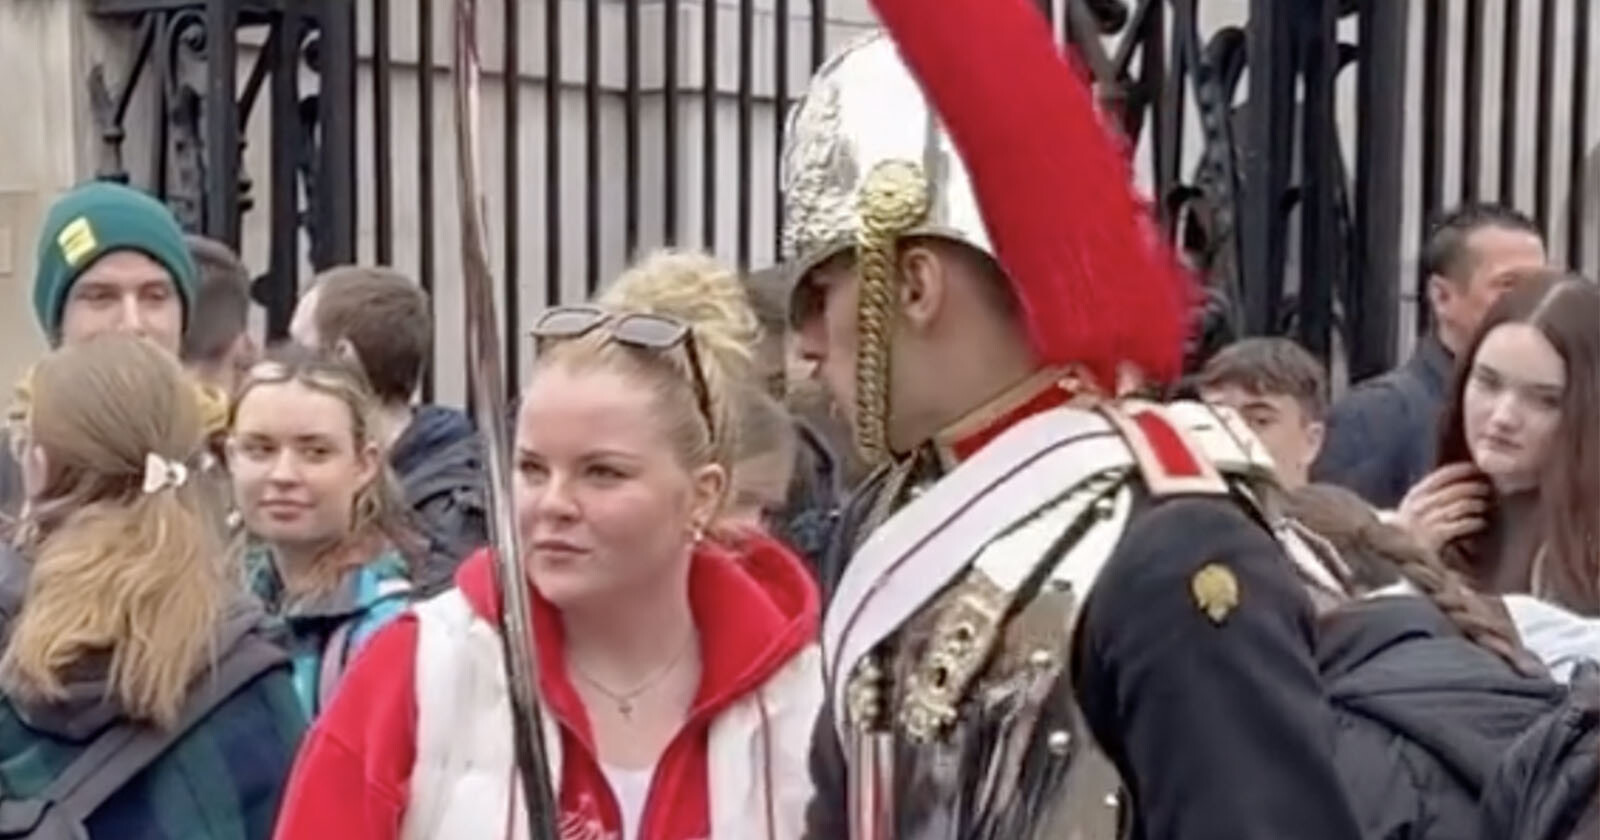 Woman Posing for Photo is Screamed at by the Kings Guard